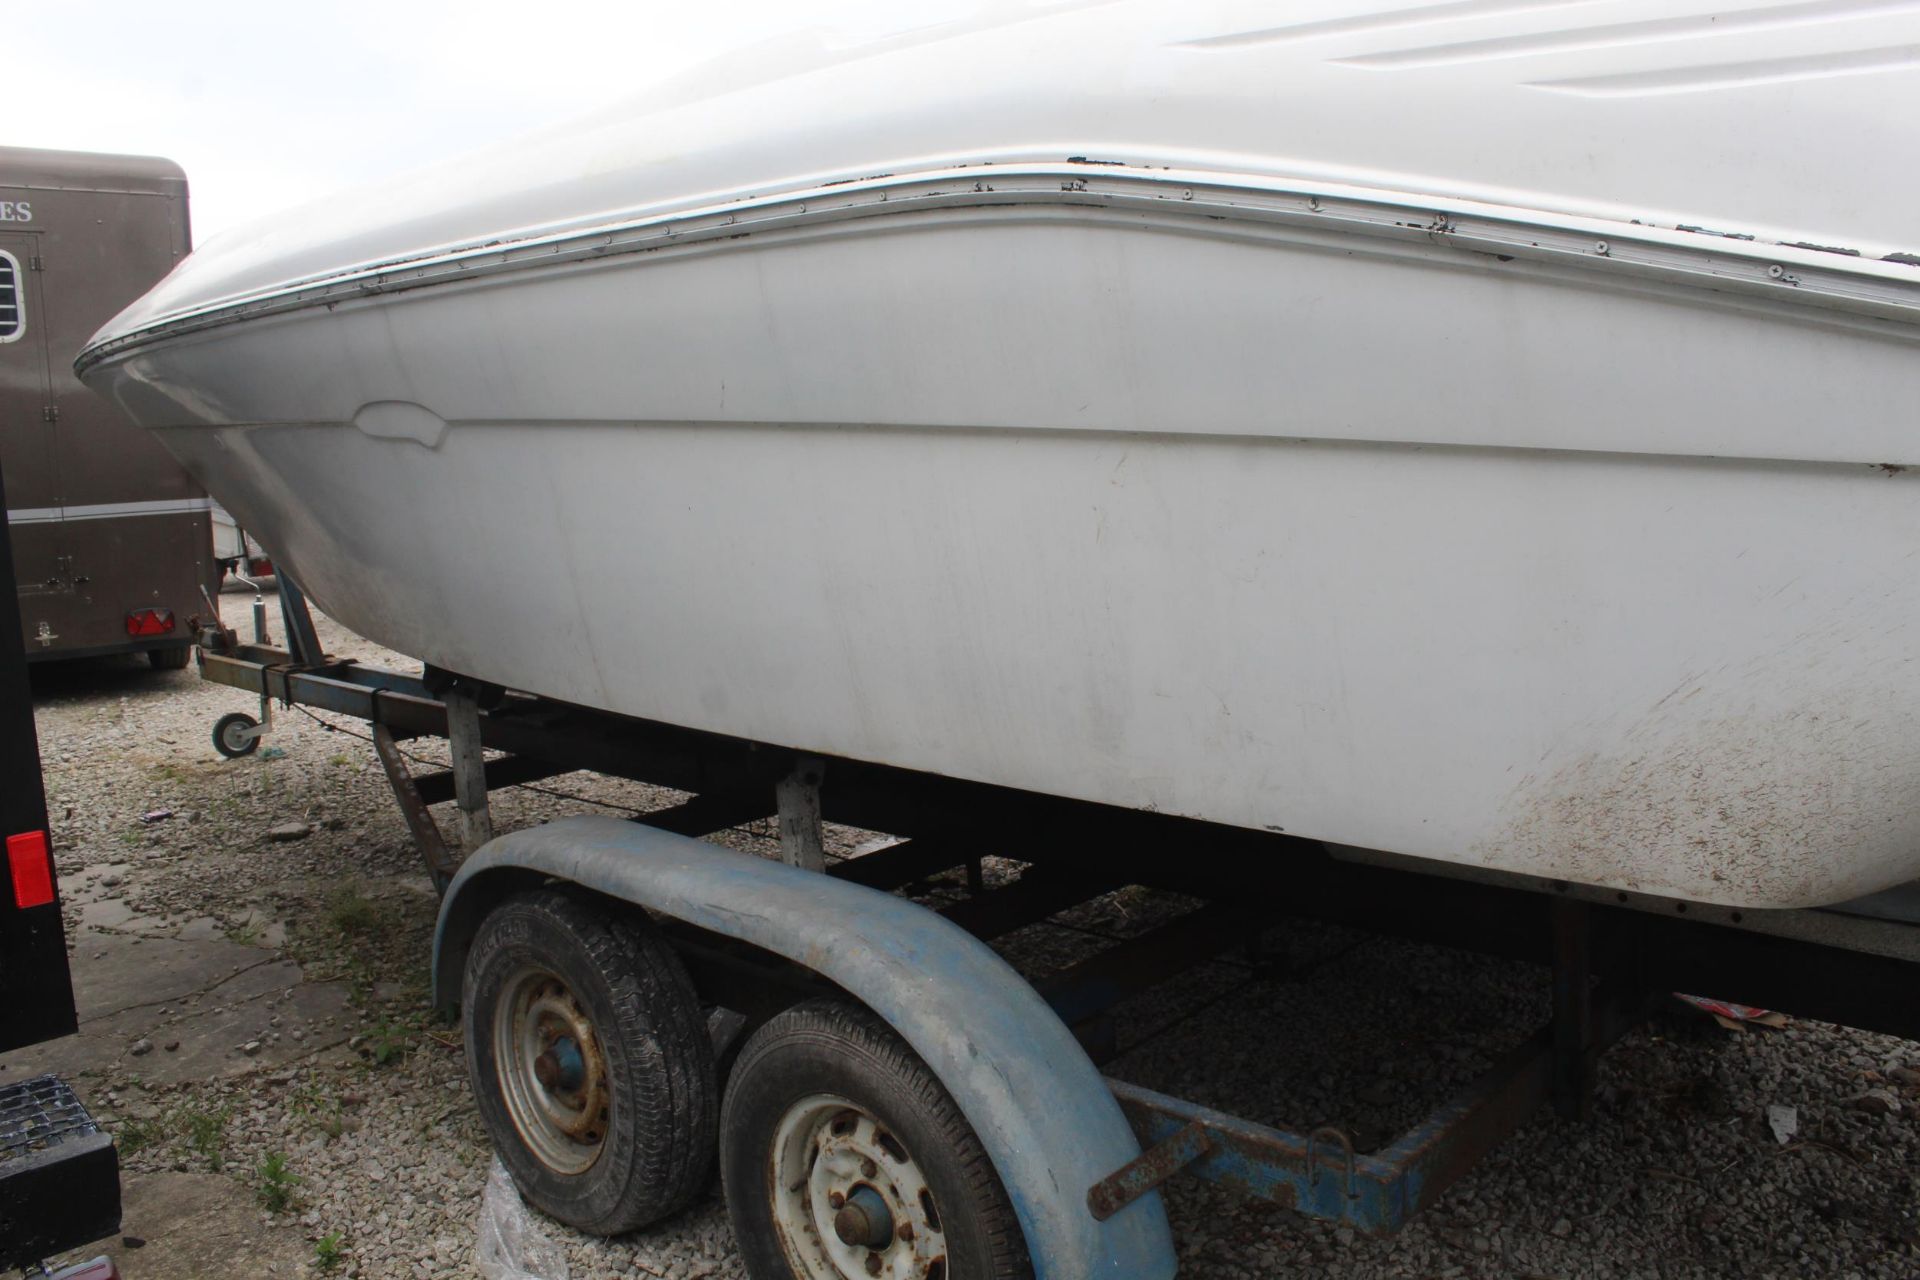 1991 SEARAY 220 WITH MERCRUISER V8/5.7 BRAVO DRIVE WITH SPEED BOAT/TRAILER NO VAT - Image 3 of 3